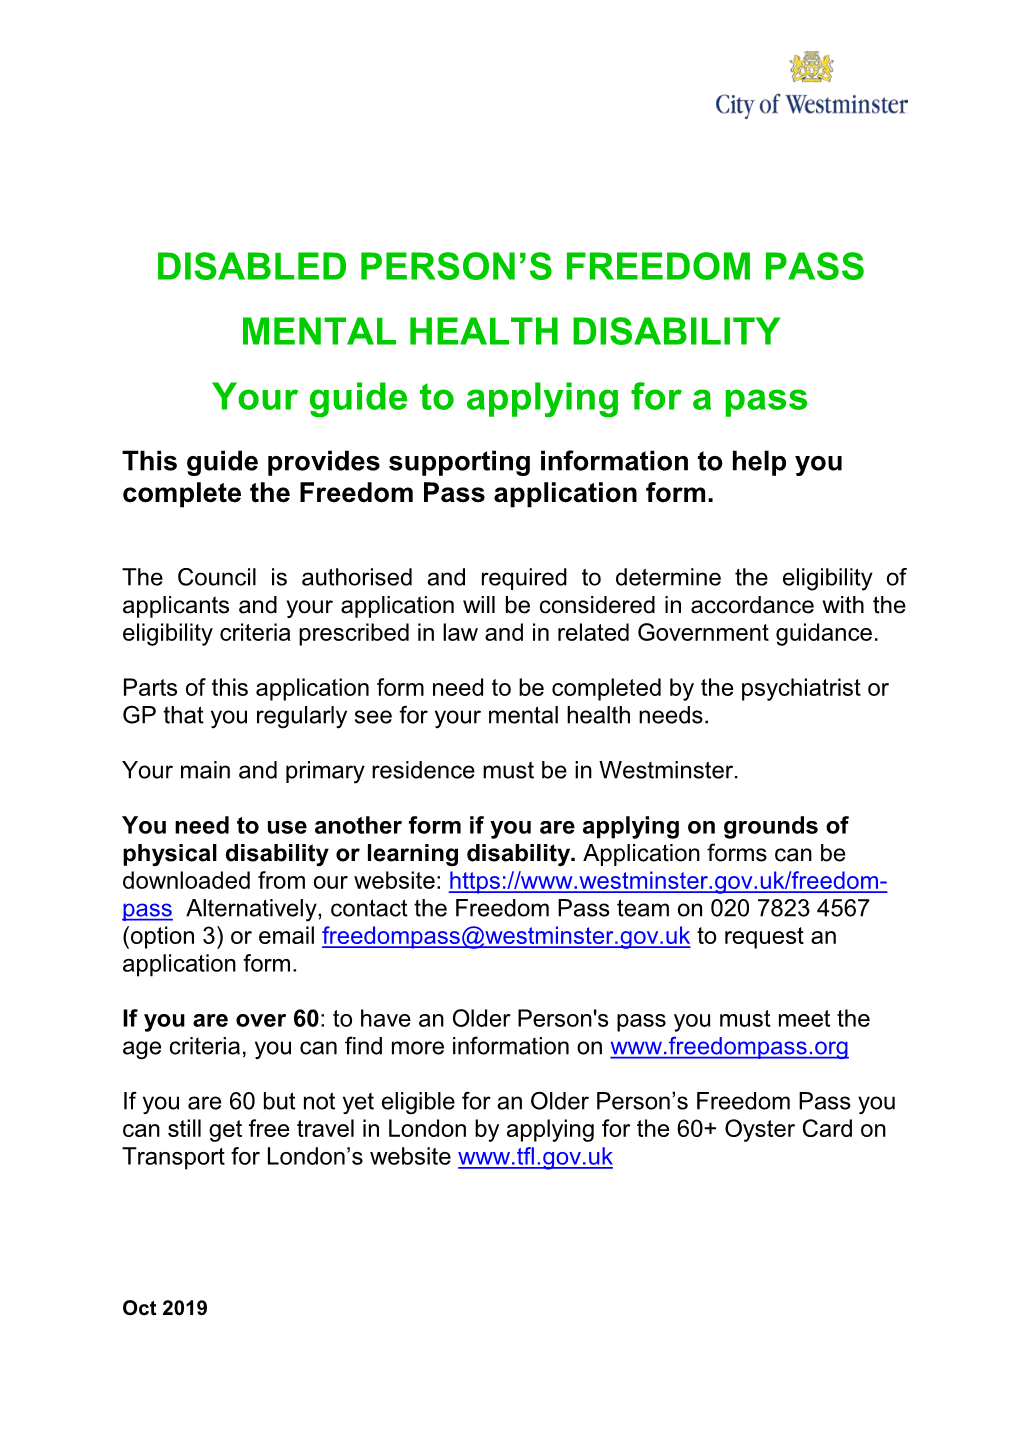 FREEDOM PASS MENTAL HEALTH DISABILITY Your Guide to Applying for a Pass